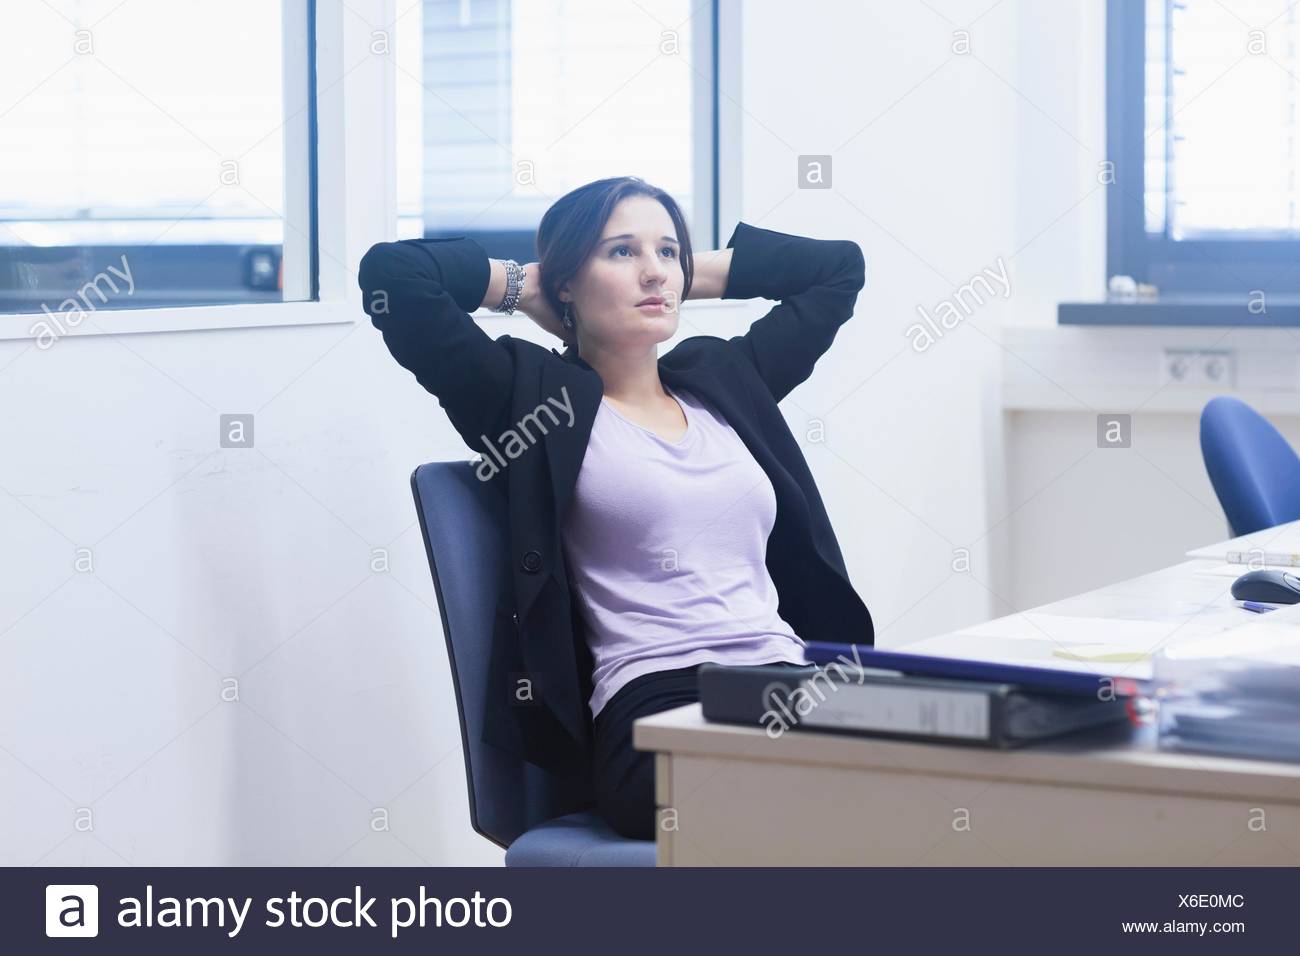 Businesswoman Leaning Back Office Chair High Resolution Stock Photography And Images Alamy